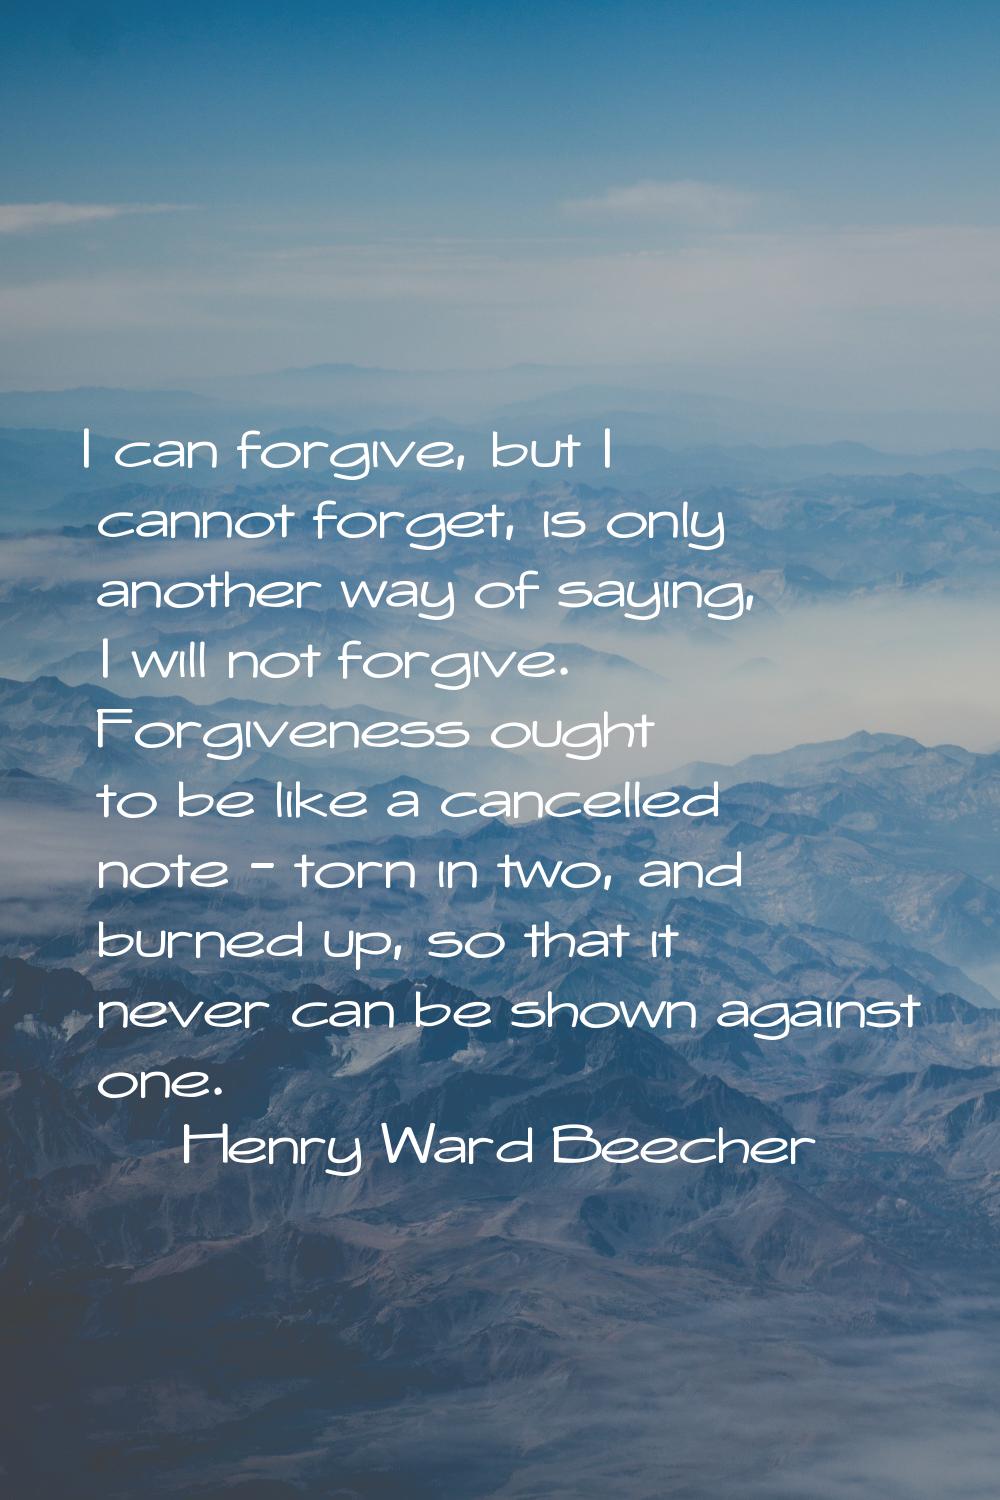 I can forgive, but I cannot forget, is only another way of saying, I will not forgive. Forgiveness 